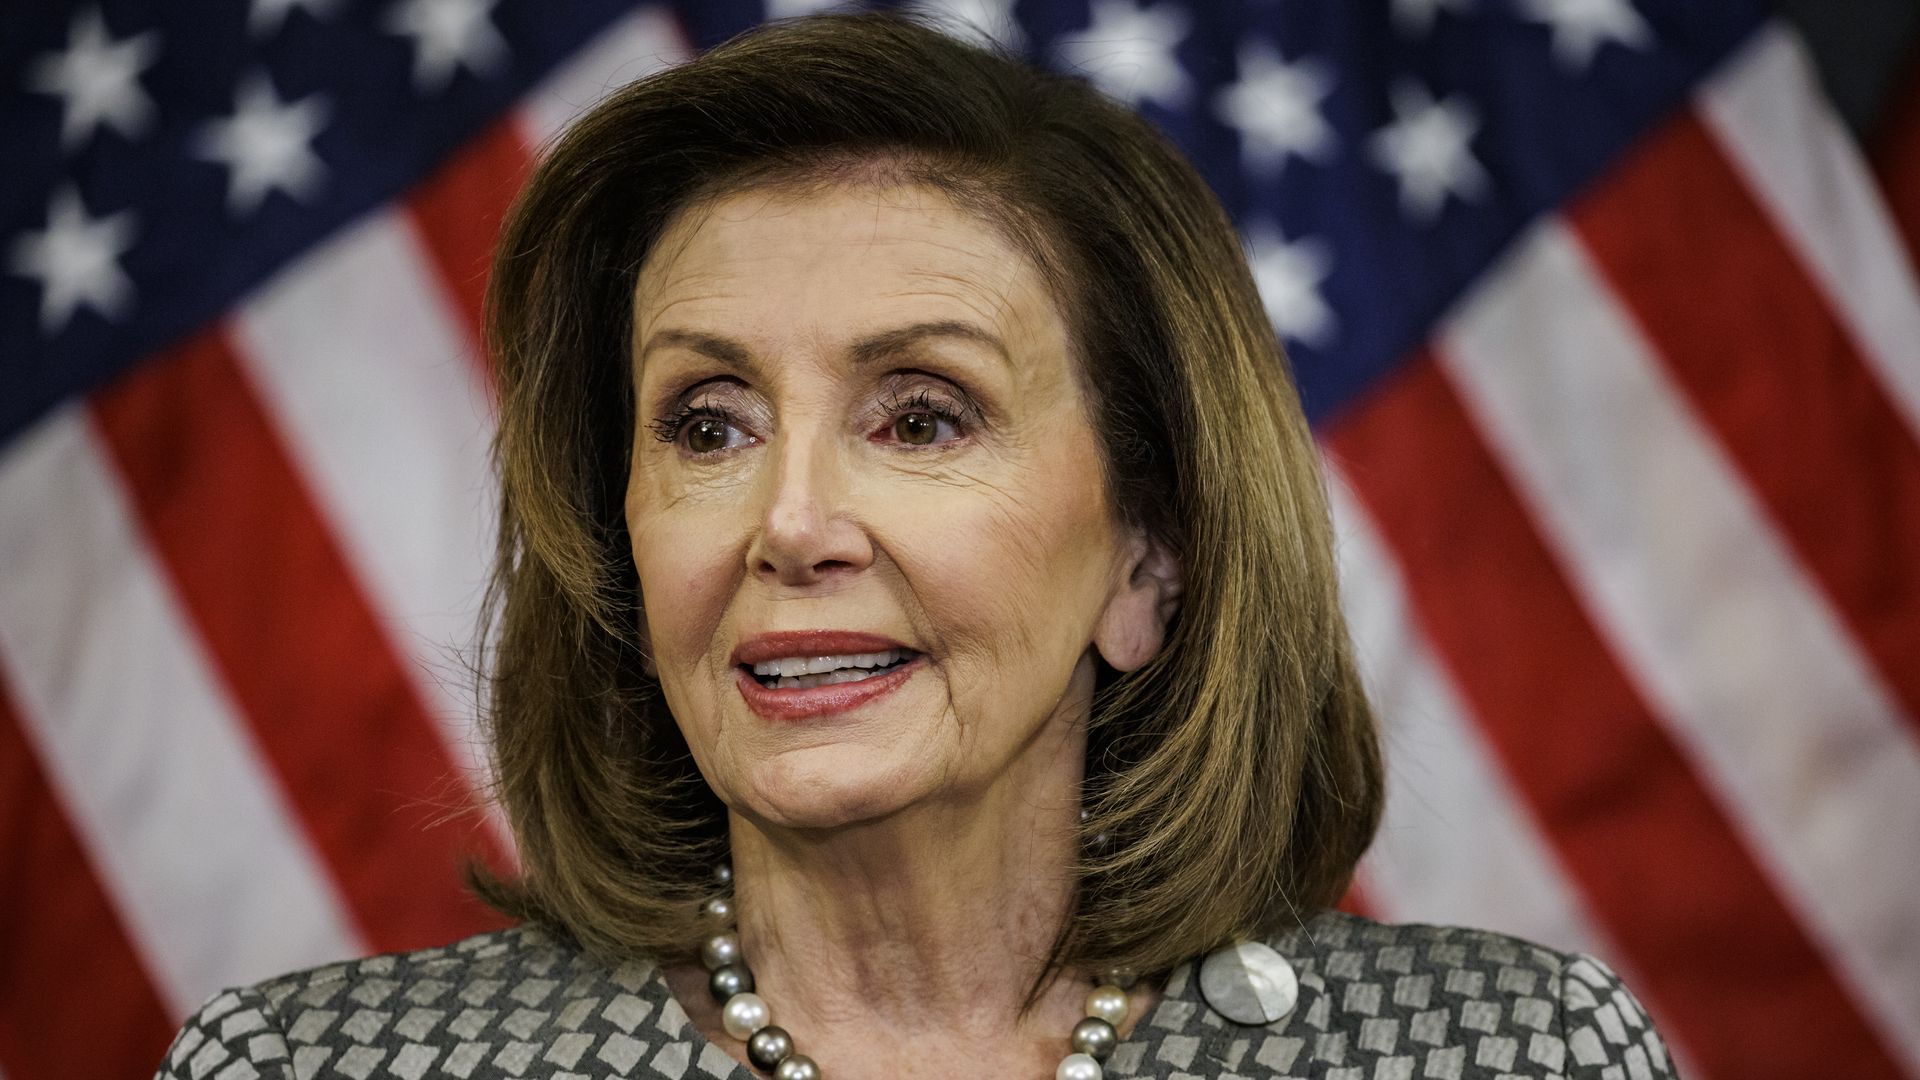 House Speaker Nancy Pelosi is seen during a news conference.